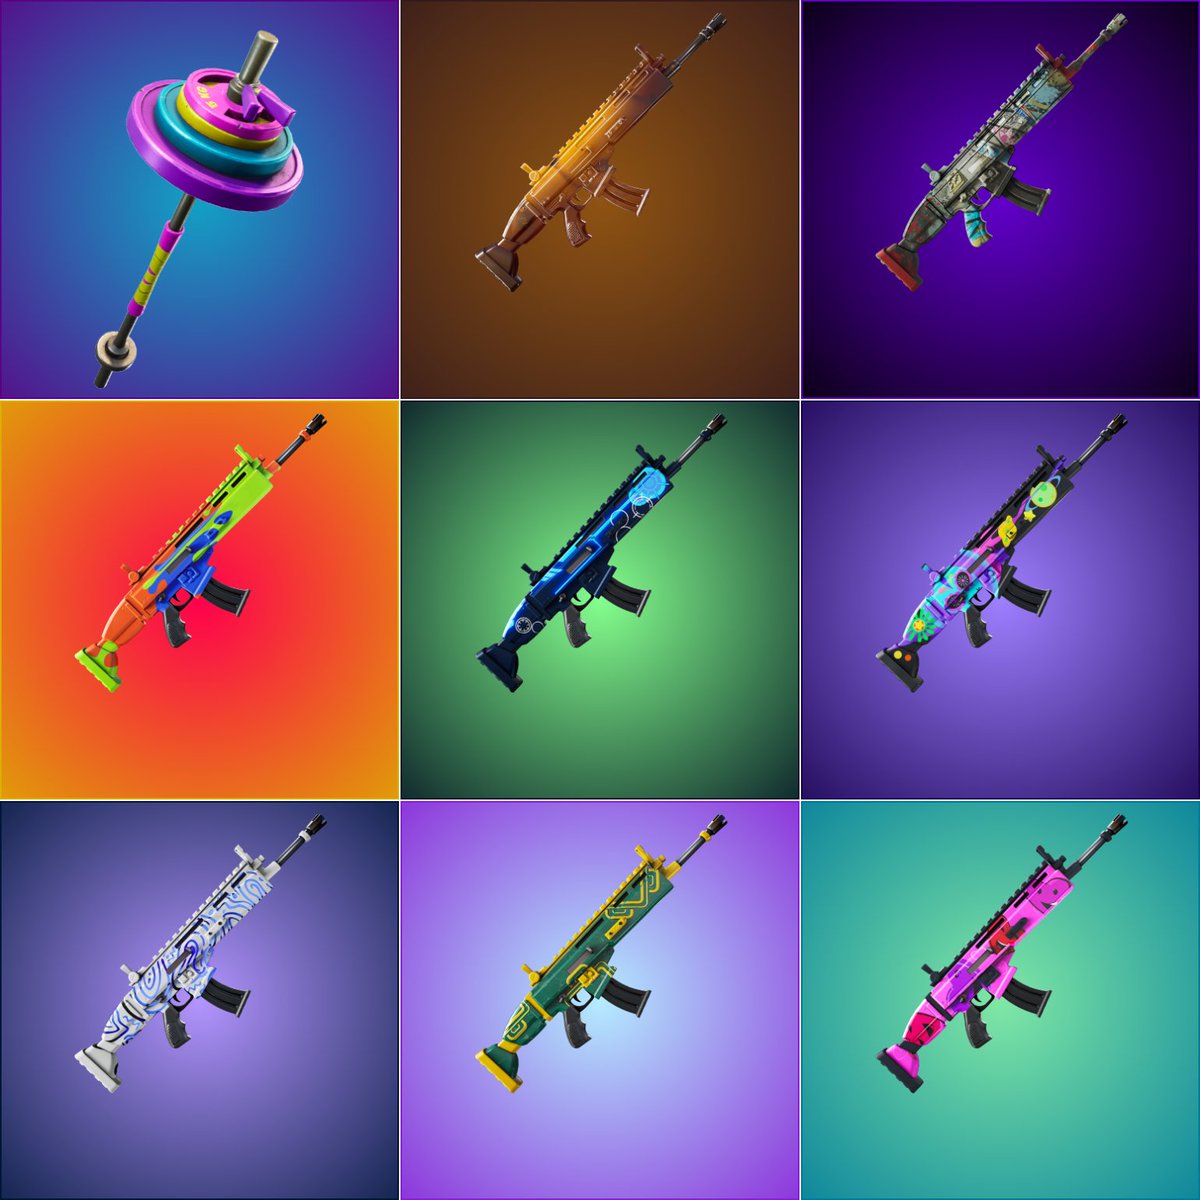 These rare items have returned to the #Fortnite Item Shop:

- Axercise: 1136 Days
- Amber: 666 Days
- Tagged: 402 Days
- Splat Splat Splat!: 379 Days
- Target Locked: 357 Days
- Galactic Carnival: 321 Days
- Inkprinted: 307 Days
- Emperor's Touch: 305 Days
- Hearty: 282 Days